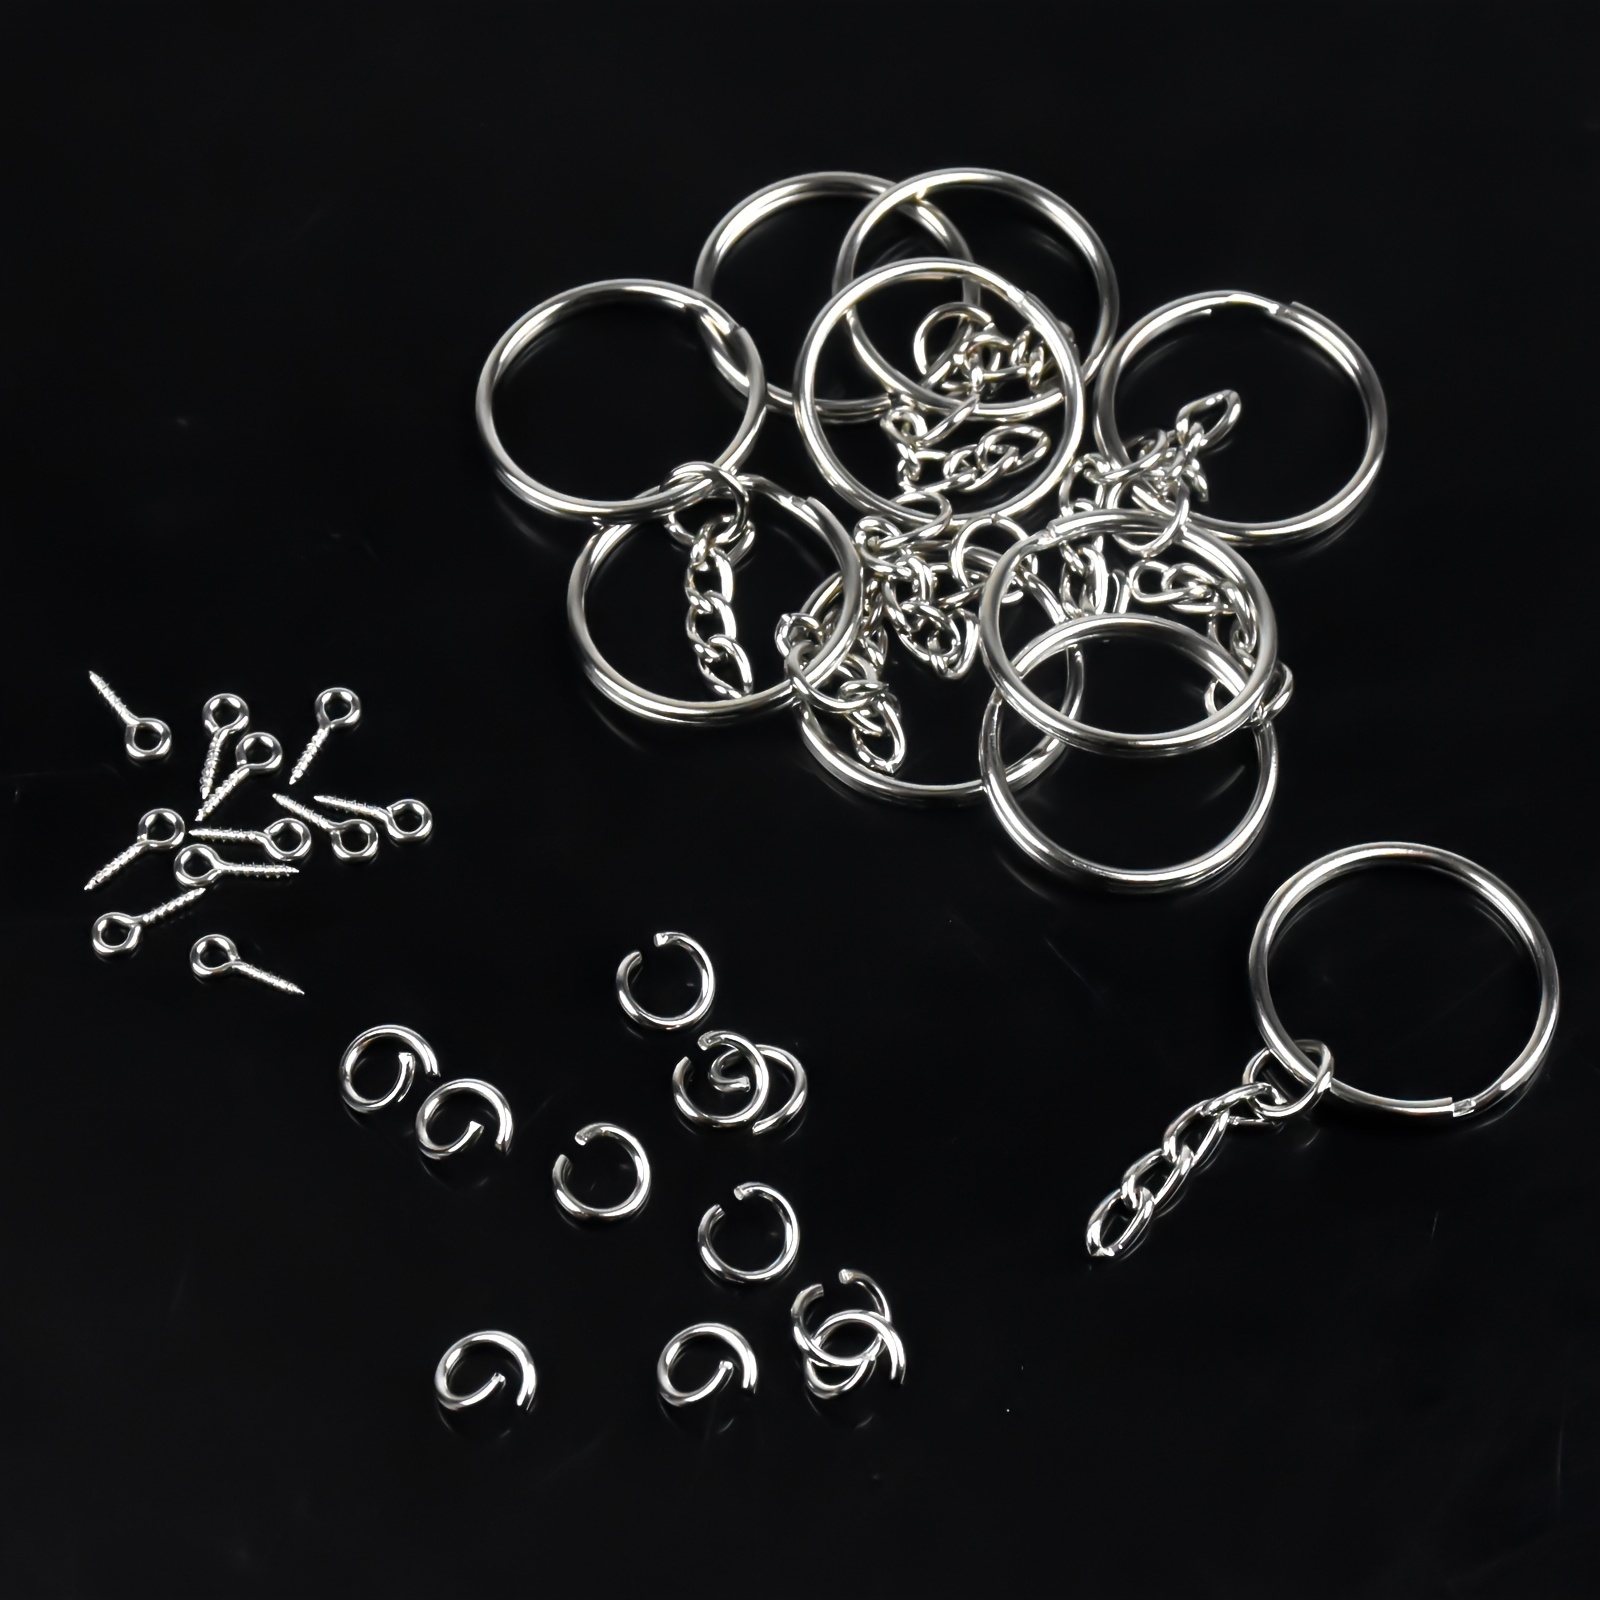 Mandala Crafts Double Split Rings for Keychains - Double Jump Rings for Jewelry Making Small Key Rings Keys Chandelier Suncatchers 400 Pcs 10mm Silver